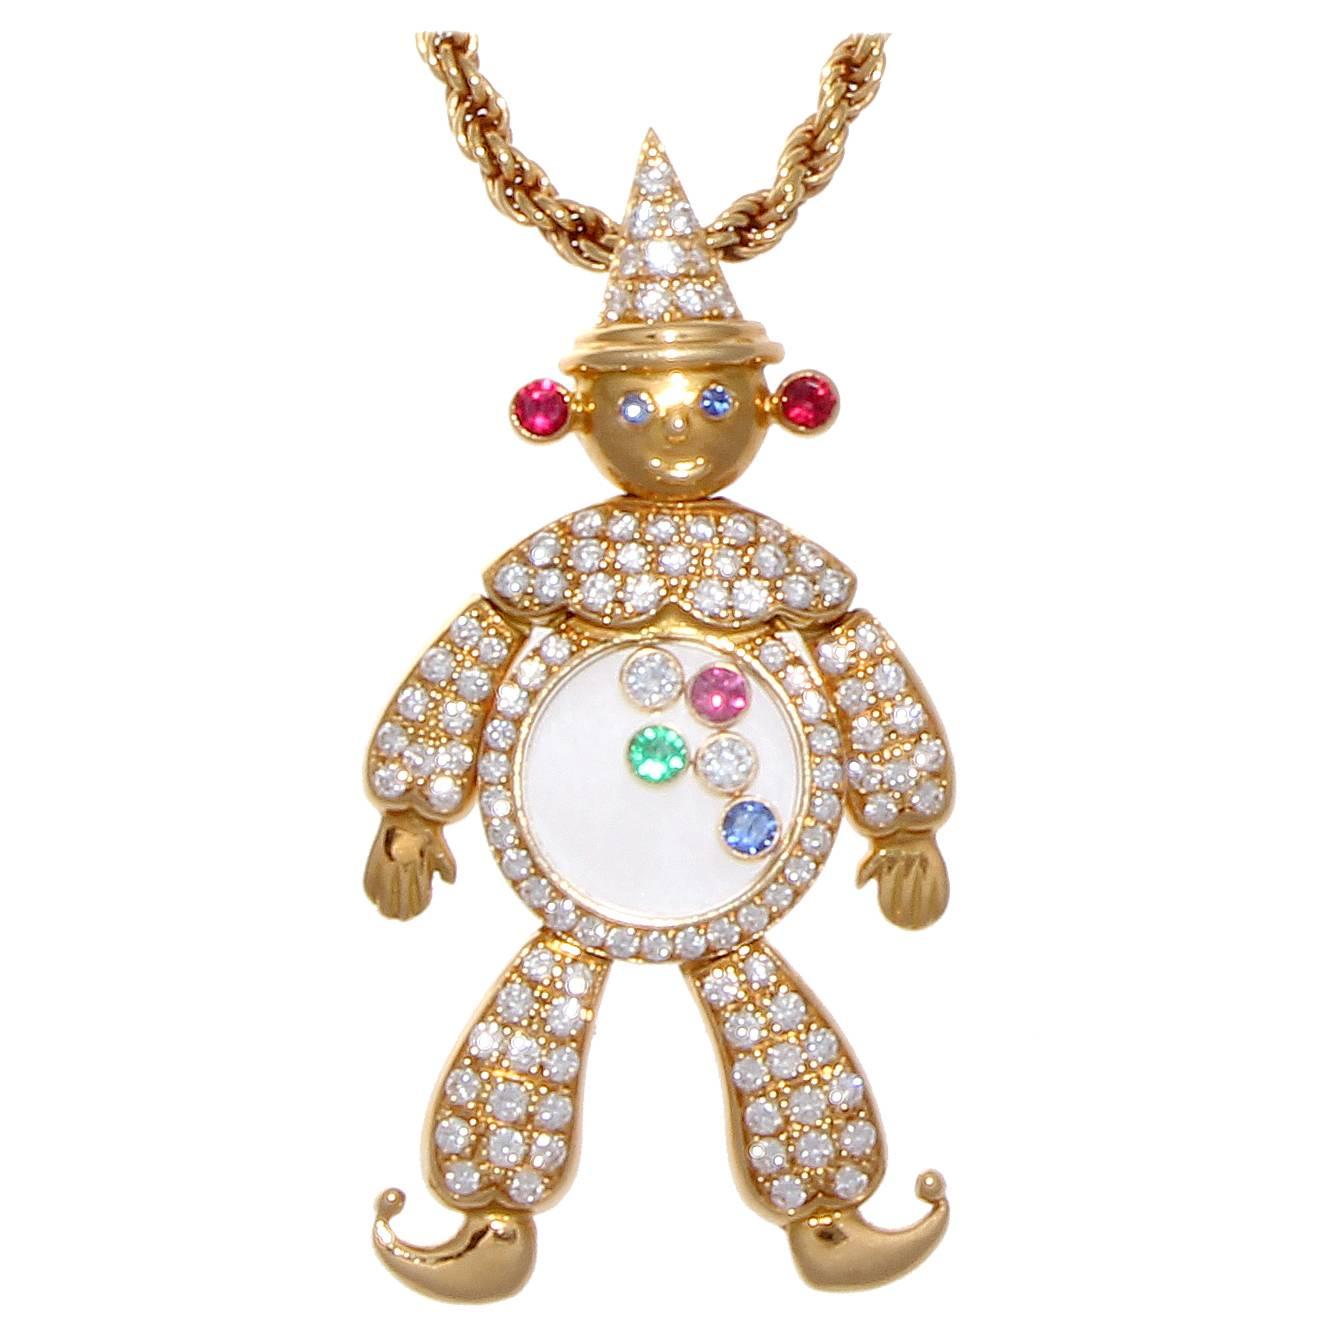 A fun and exciting color-filled portrayal of comic relief by Chopard. This clown has been dressed in an 18k gold costume polka dotted with numerous near colorless diamonds and a transparent belly filled with free moving polka dots of diamonds,